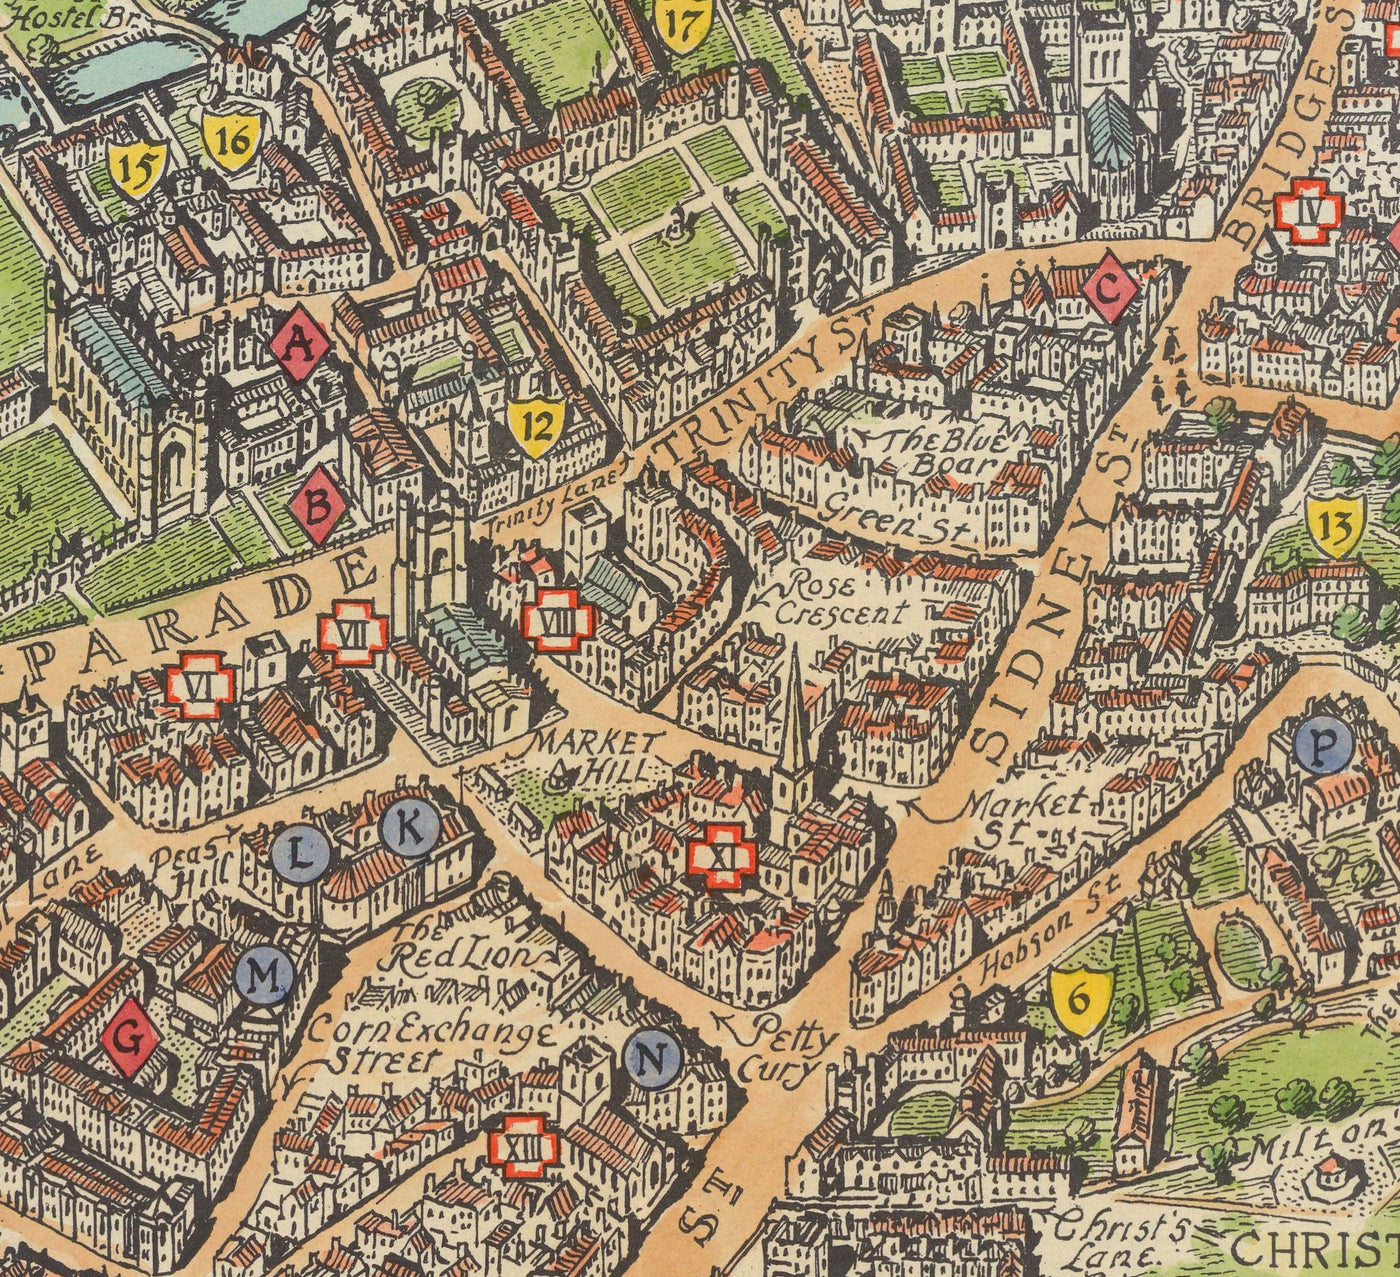 Old Map of Cambridge, 1929 - Trinity, St John's, King's, Peterhouse, Jesus - University and Colleges